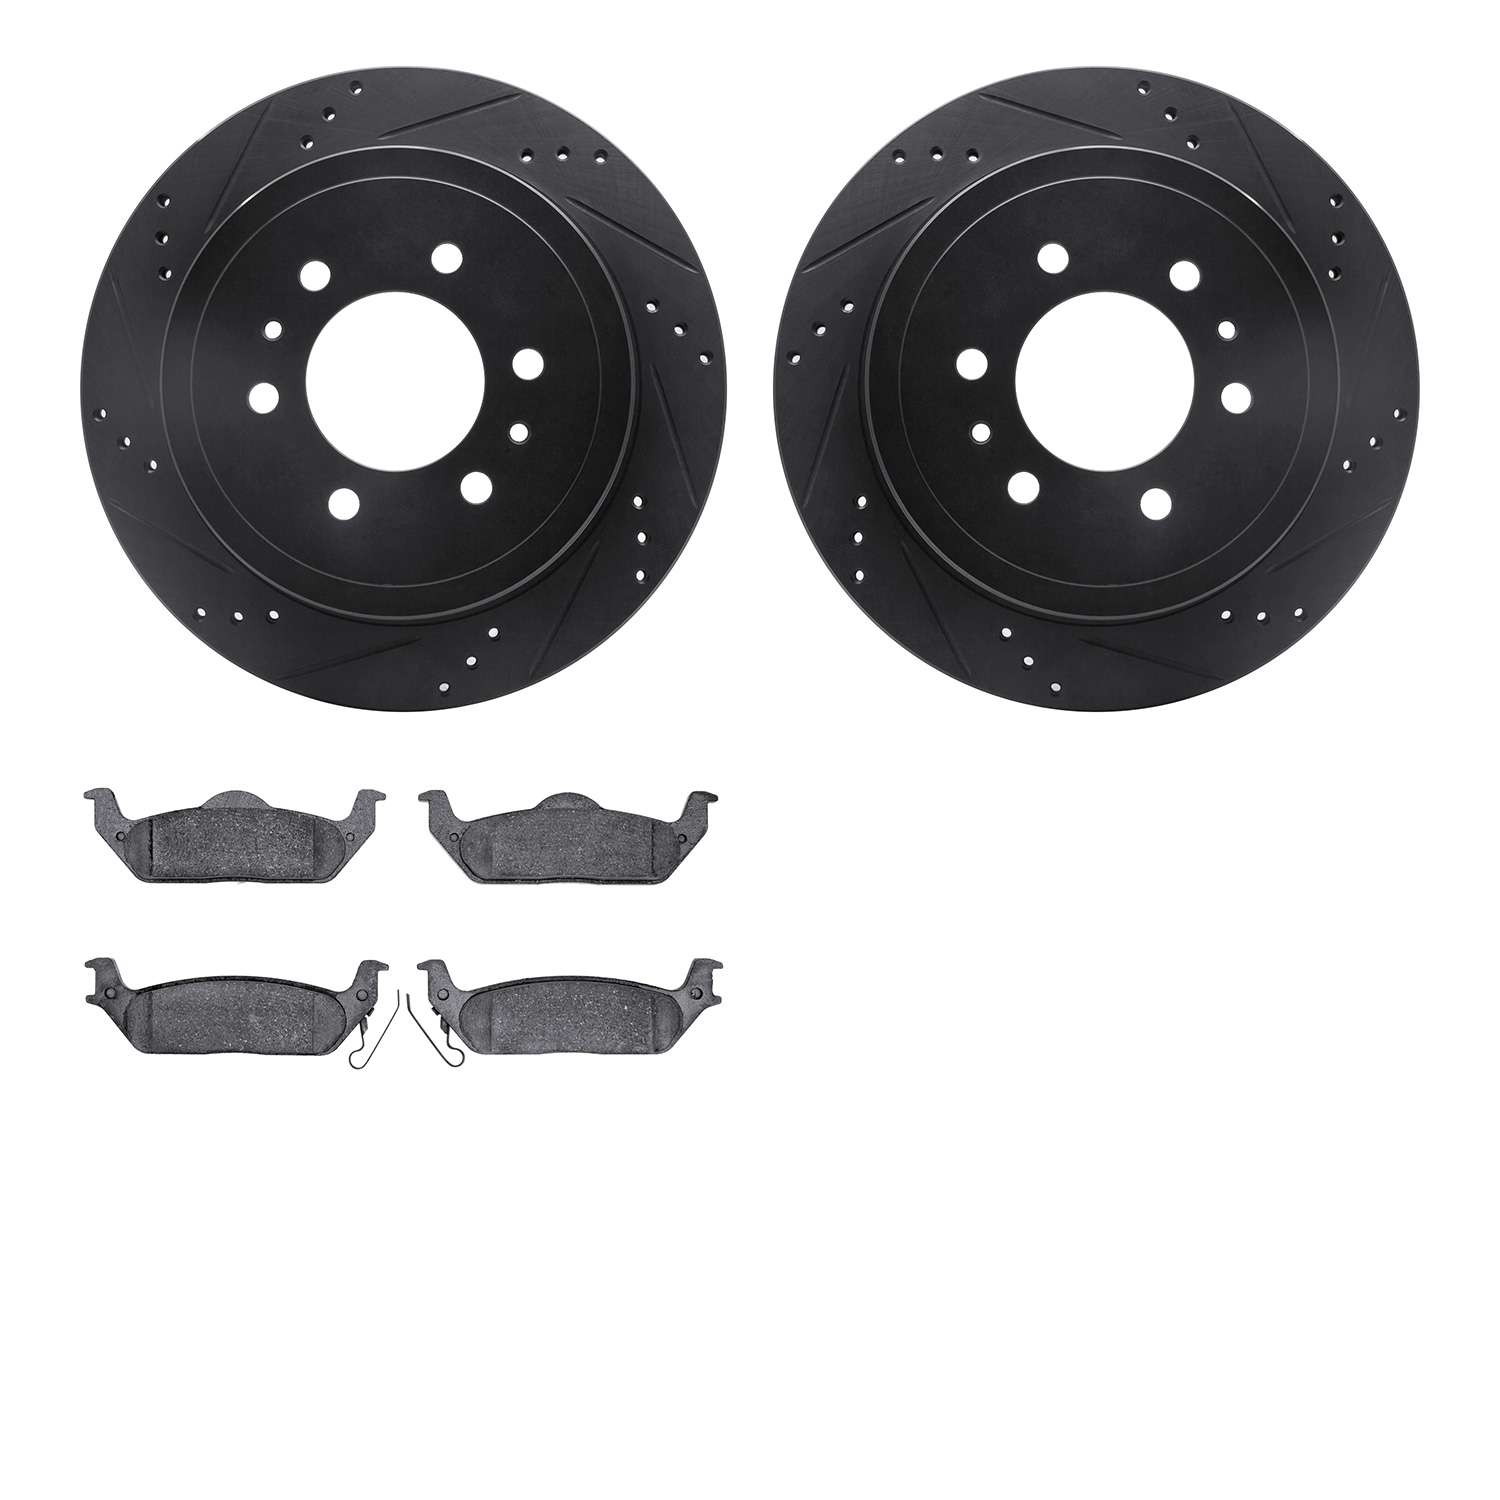 8402-54074 Drilled/Slotted Brake Rotors with Ultimate-Duty Brake Pads Kit [Black], 2004-2011 Ford/Lincoln/Mercury/Mazda, Positio